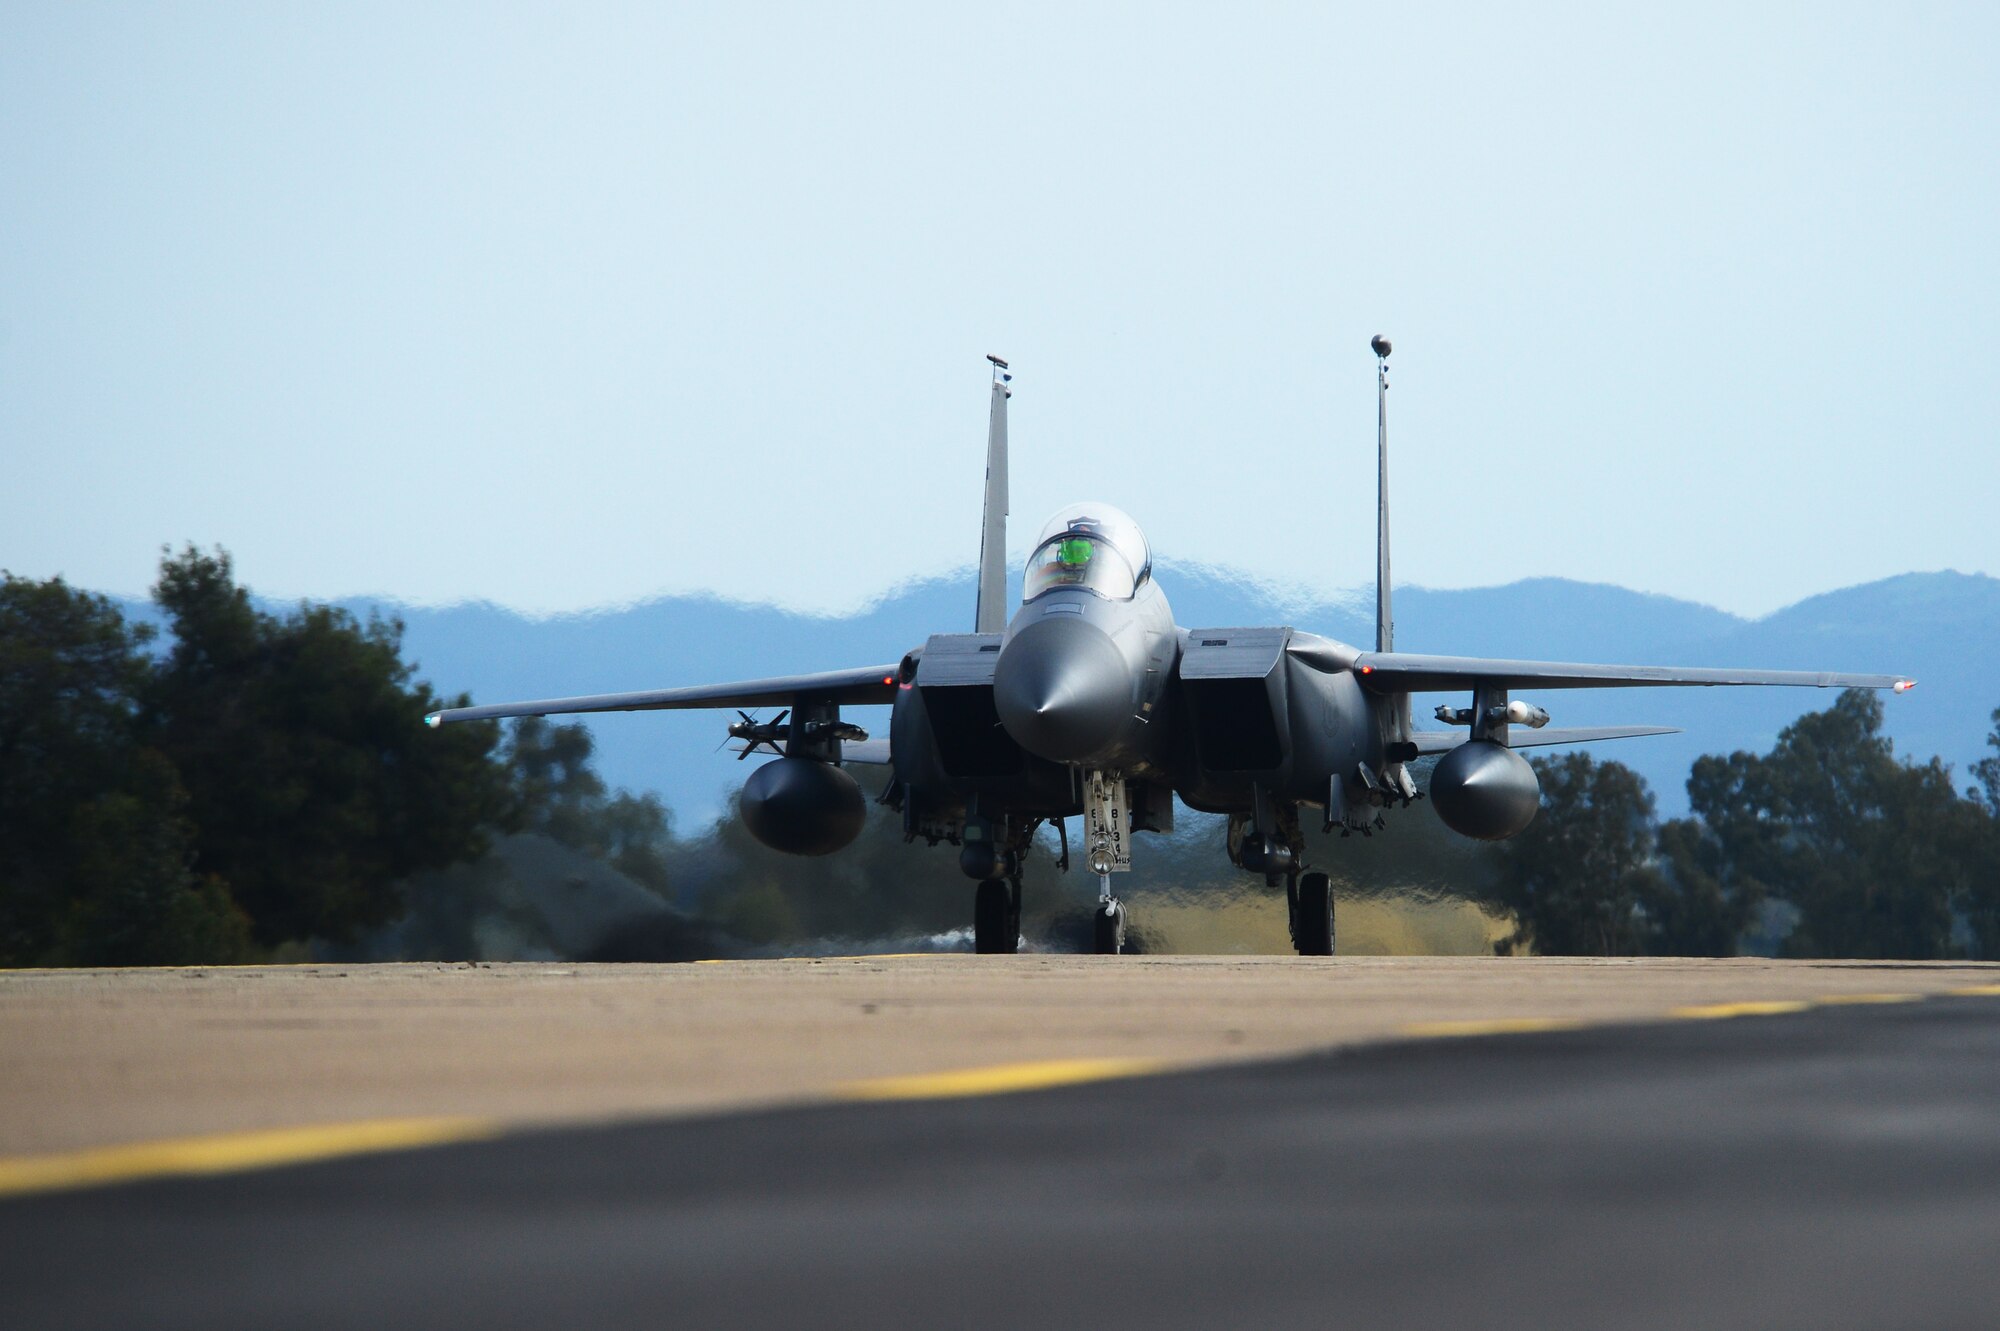 An F-15E Strike Eagle assigned to the 492nd Fighter Squadron, Royal Air Force Lakenheath, England taxis at Andravida Air Base, Greece, March 21, 2018, during exercise INIOHOS 18. INIOHOS 18 is a Hellenic Air Force-led, large force flying exercise focused on strengthening partnerships and interoperability. (U.S. Air Force photo/1st Lt. Elias Small)